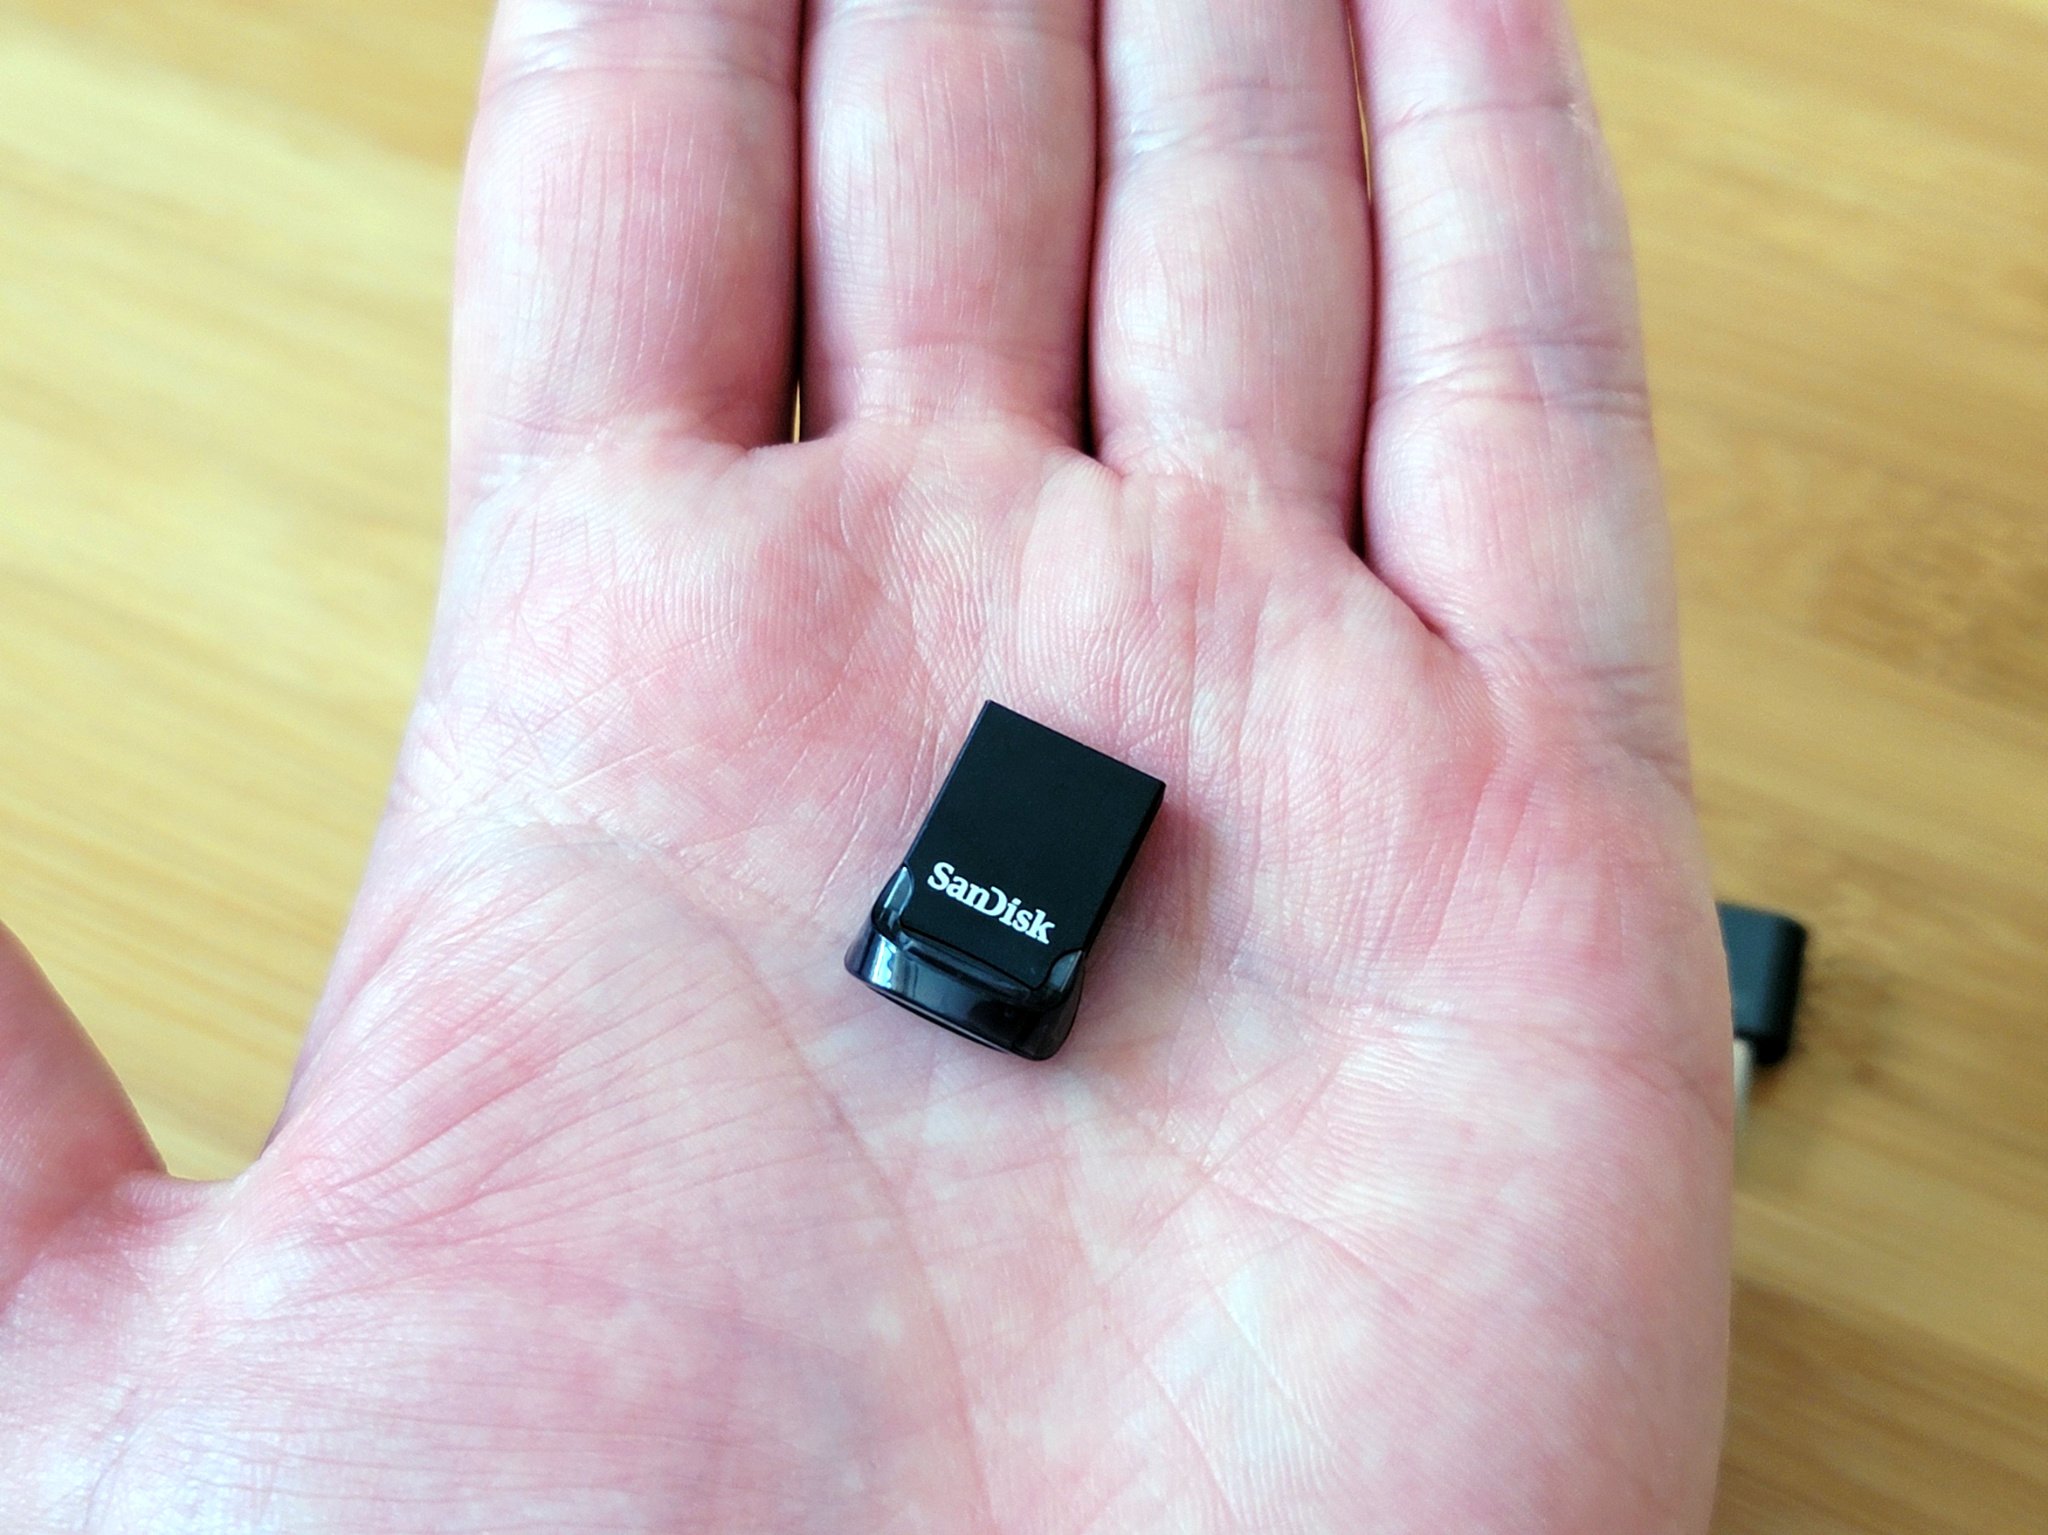 SanDisk Ultra II Plus USB - SD Card Review